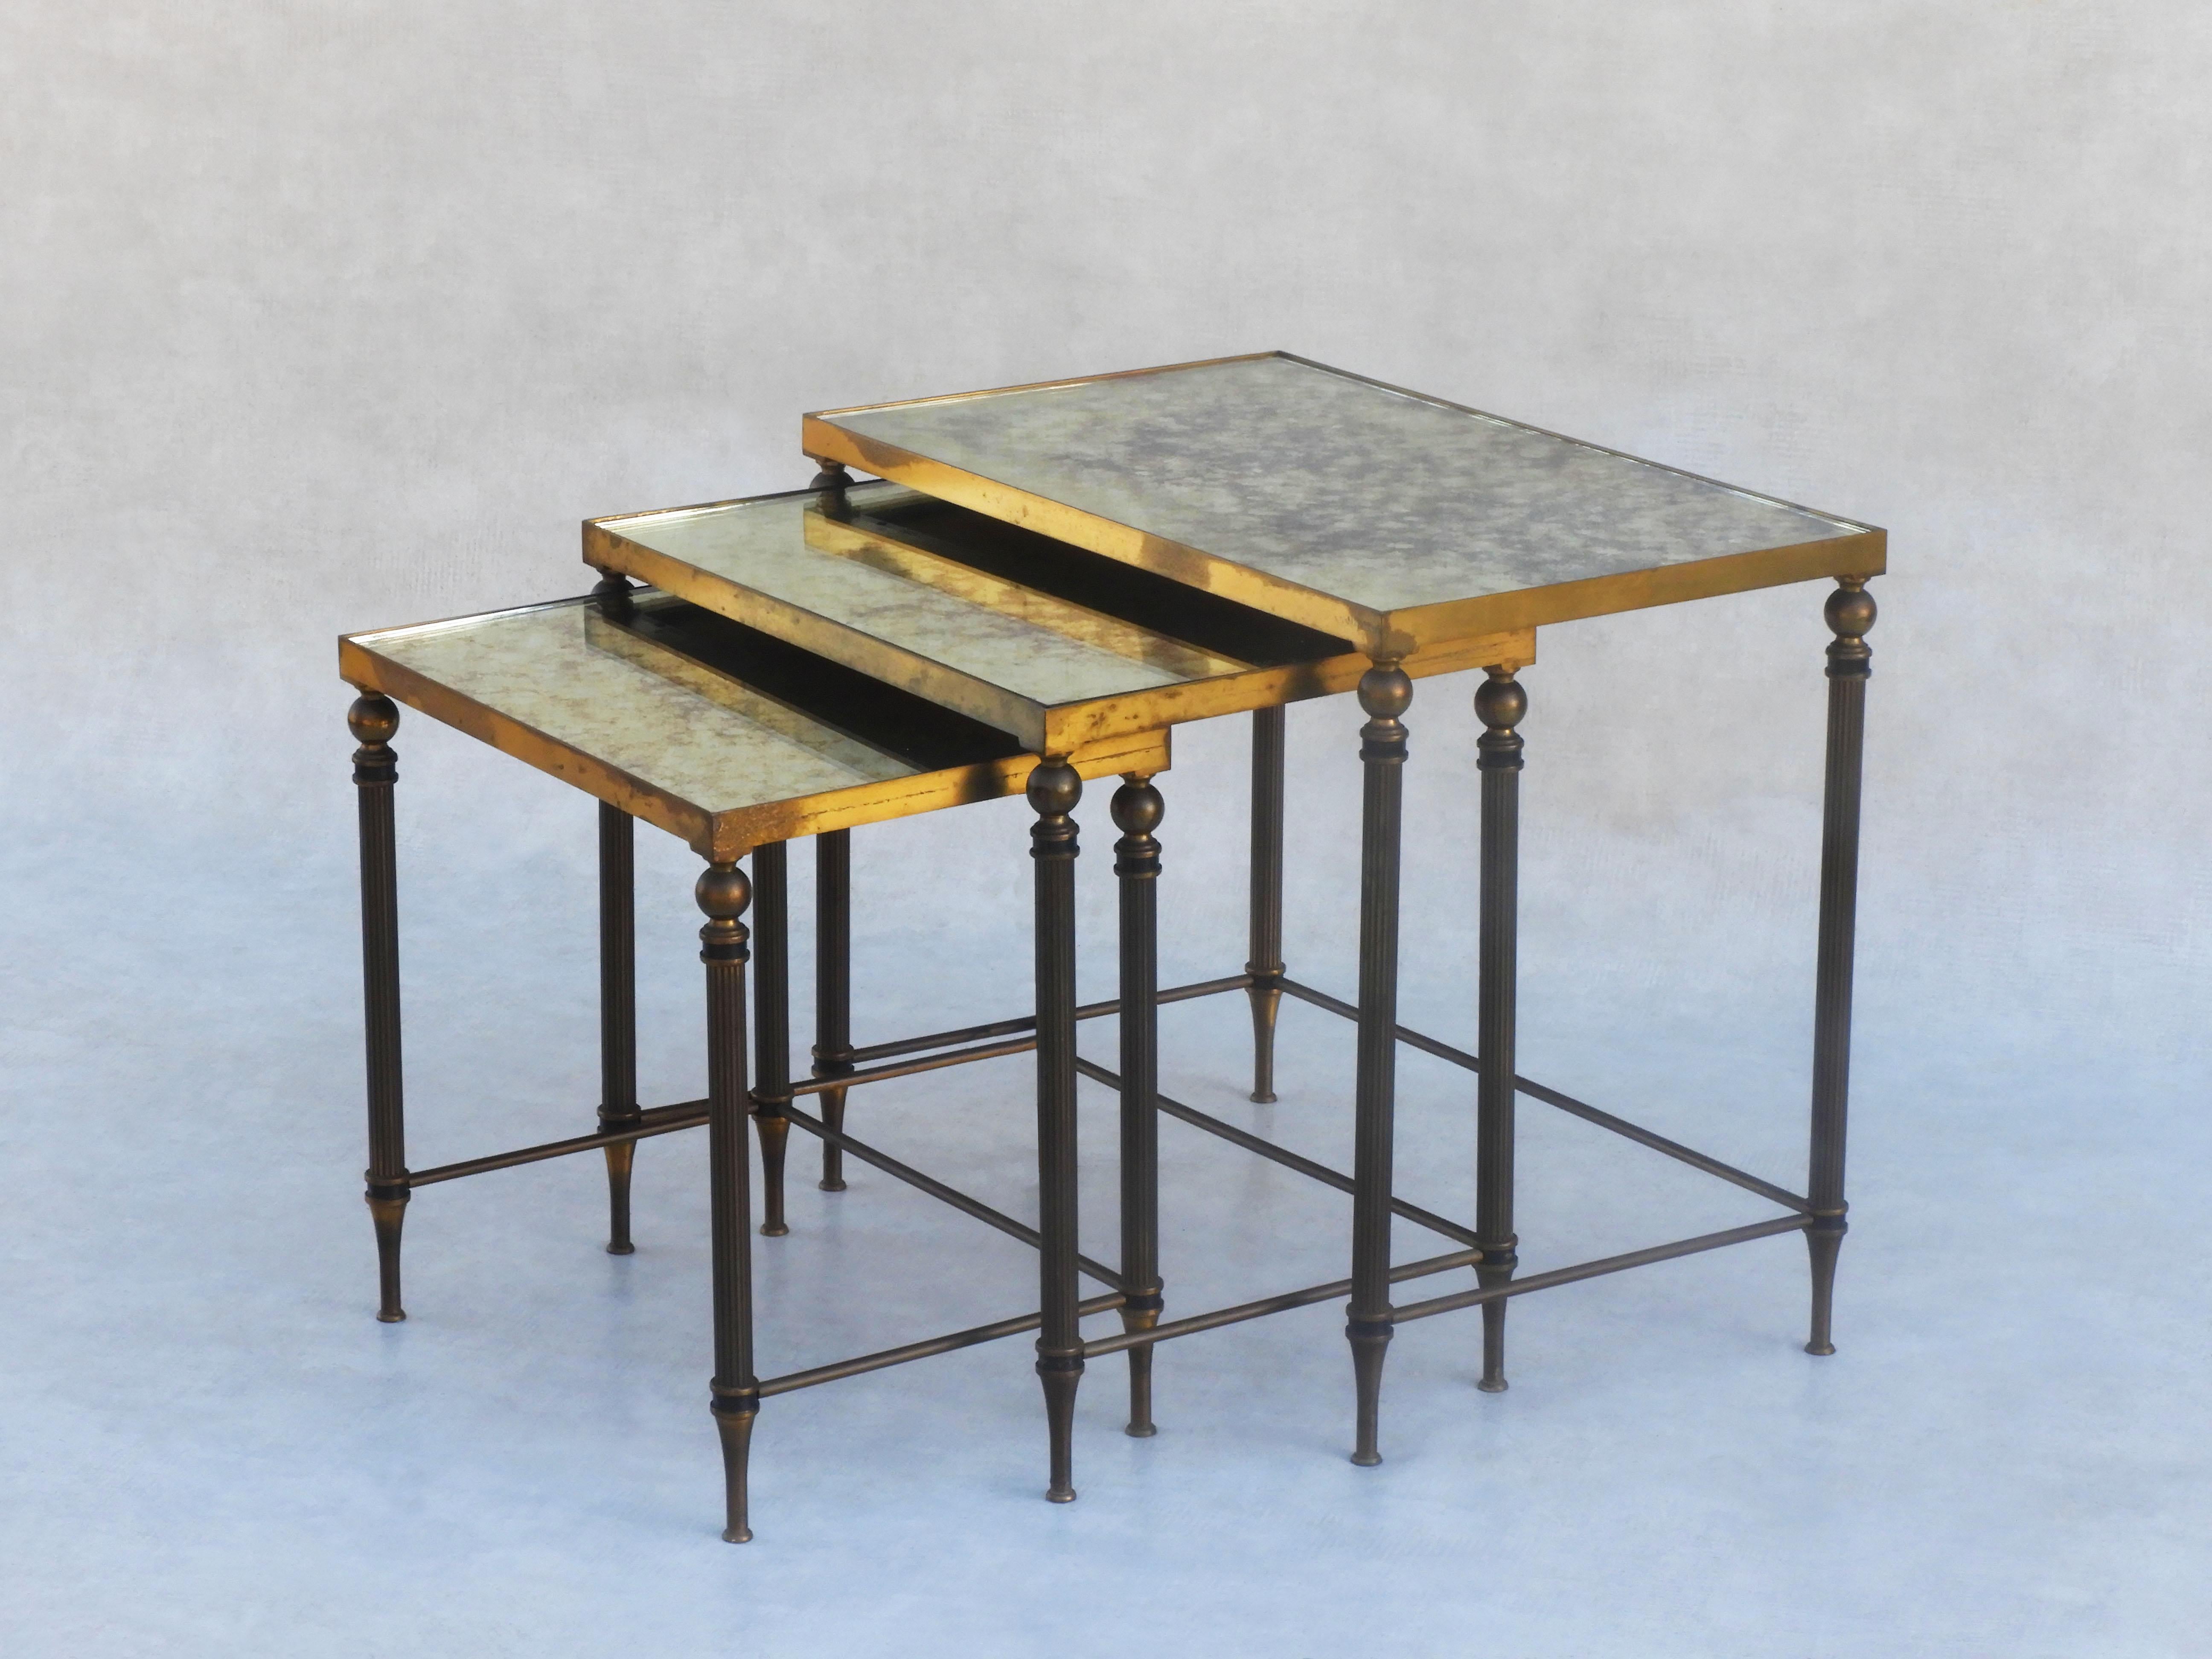 A fabulous set of mid-century nesting tables inset with 'verre églomisé' mirrored tops. Three vintage, neo-classical style tables with fluted legs and dappled gold and silver mirrored glass, in the style of French design houses like Maison Jansen,